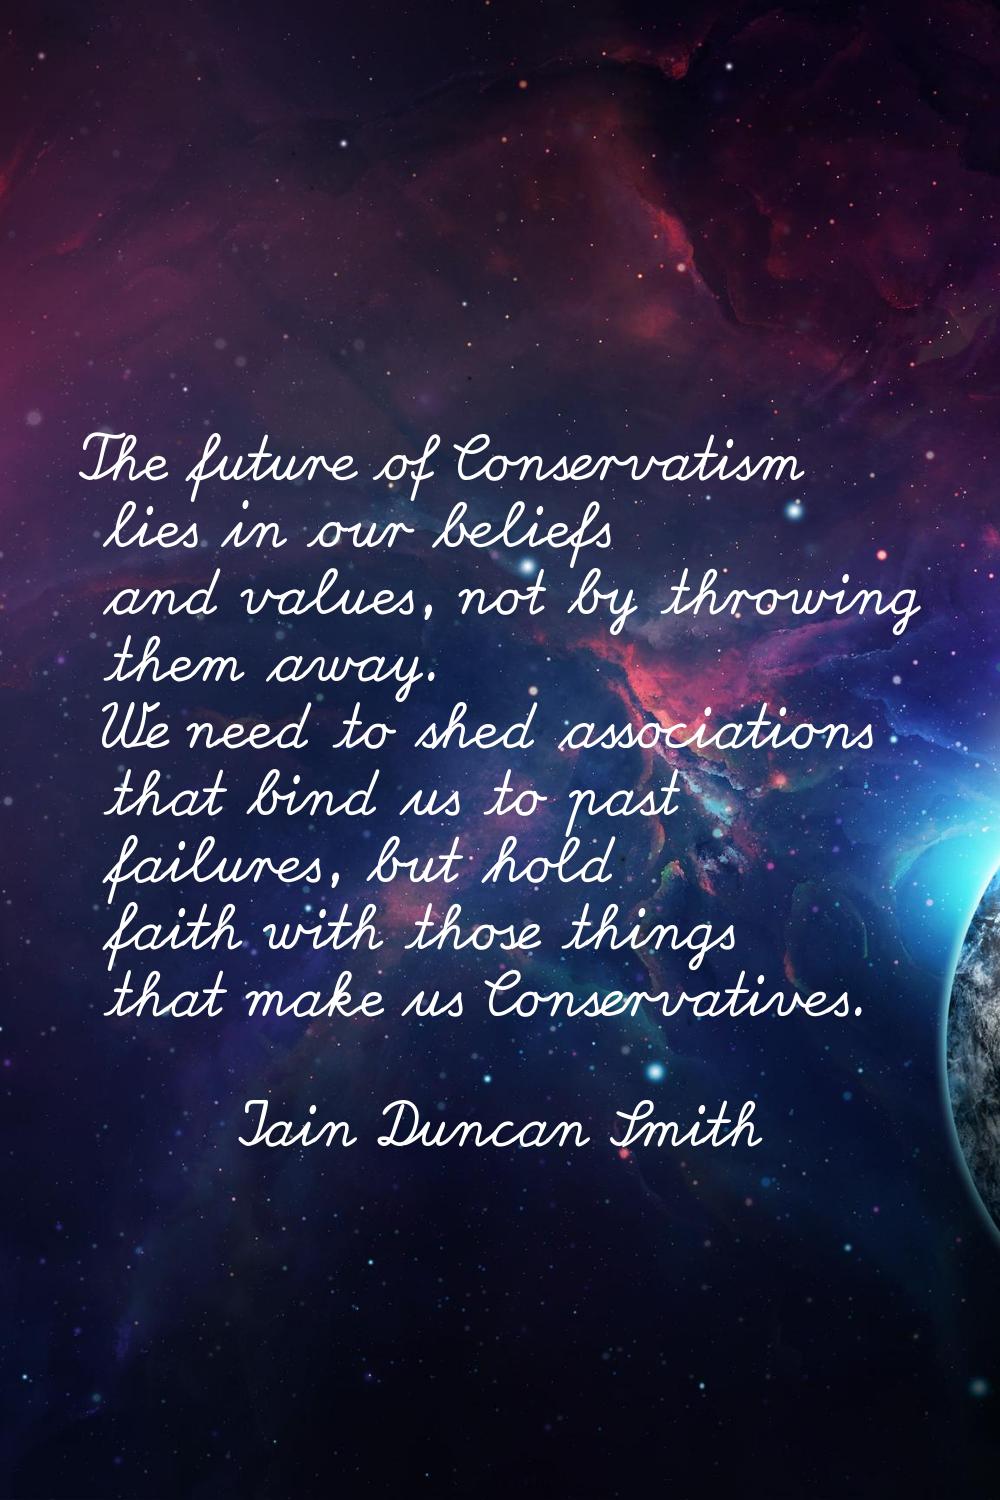 The future of Conservatism lies in our beliefs and values, not by throwing them away. We need to sh